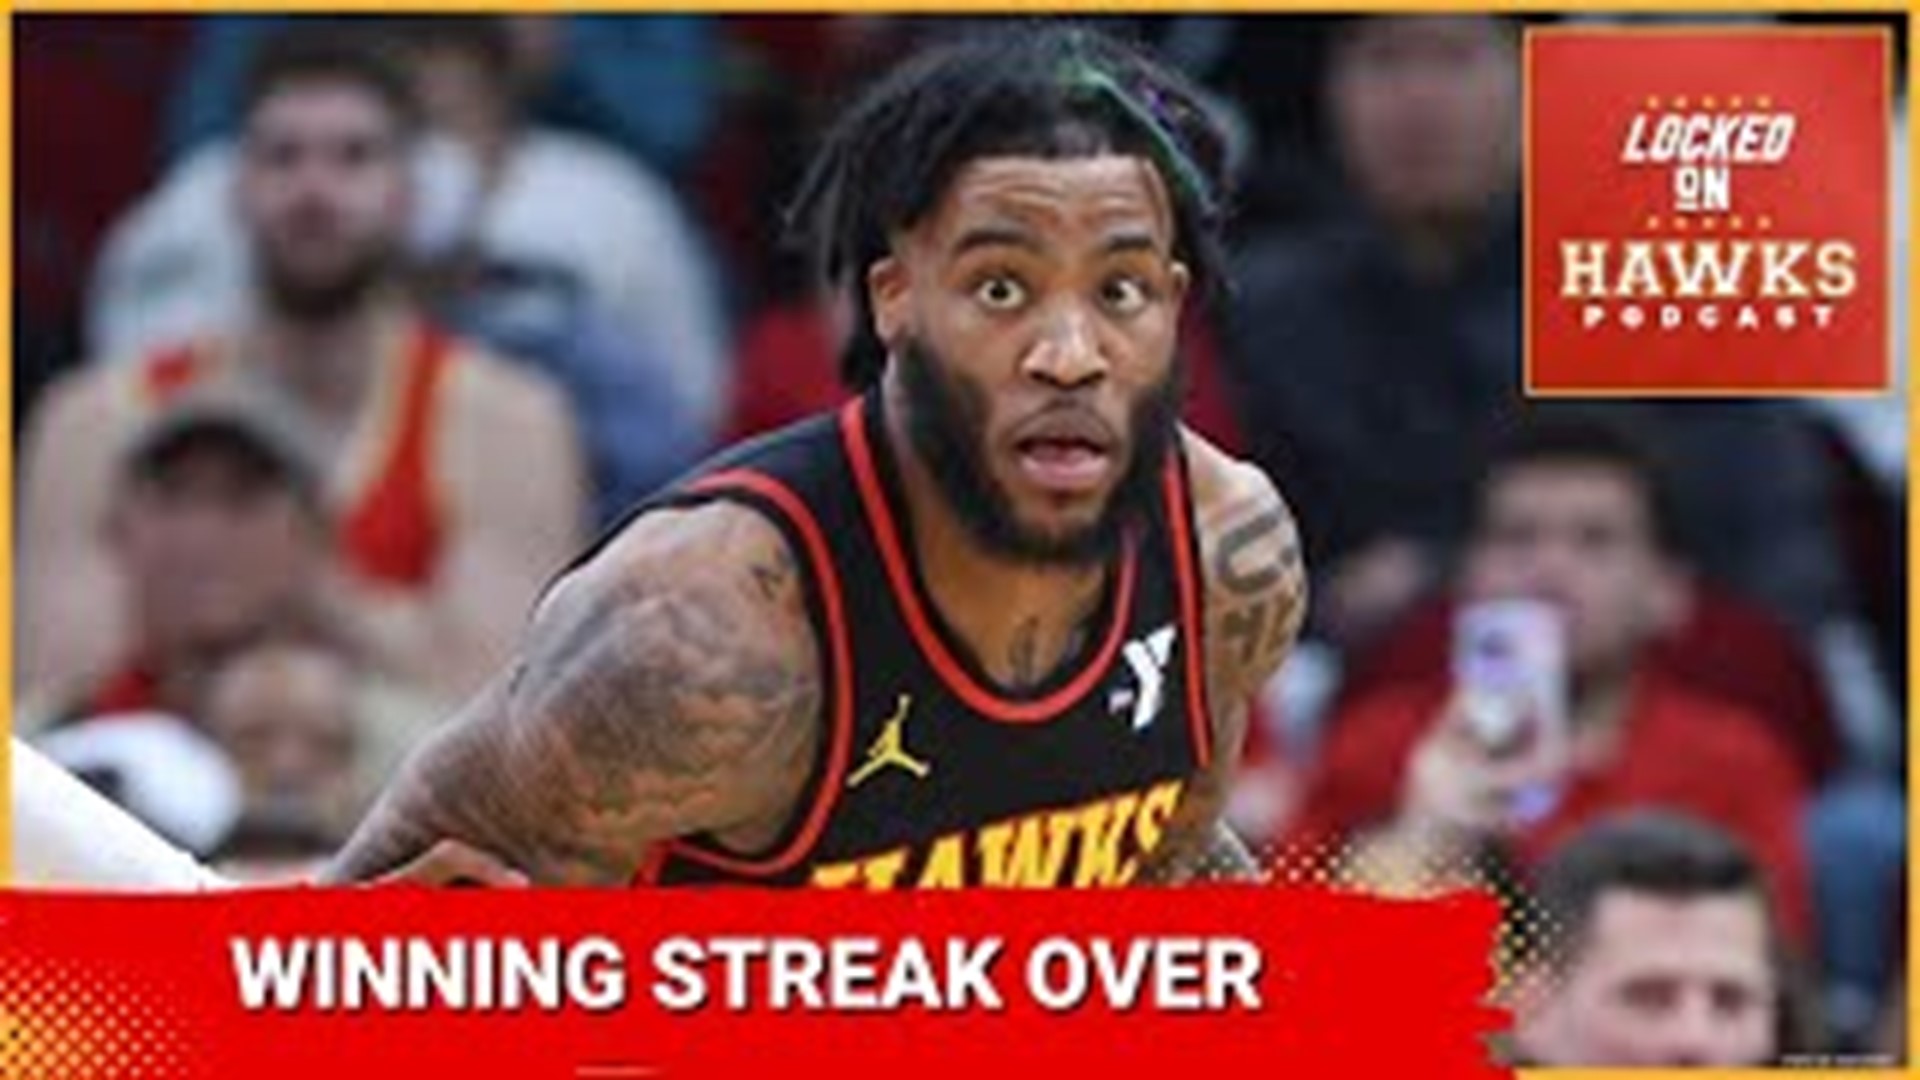 Brad Rowland hosts episode No. 1635 of the Locked on Hawks podcast. The show breaks down Saturday's game between the Atlanta Hawks and the Cleveland Cavaliers.